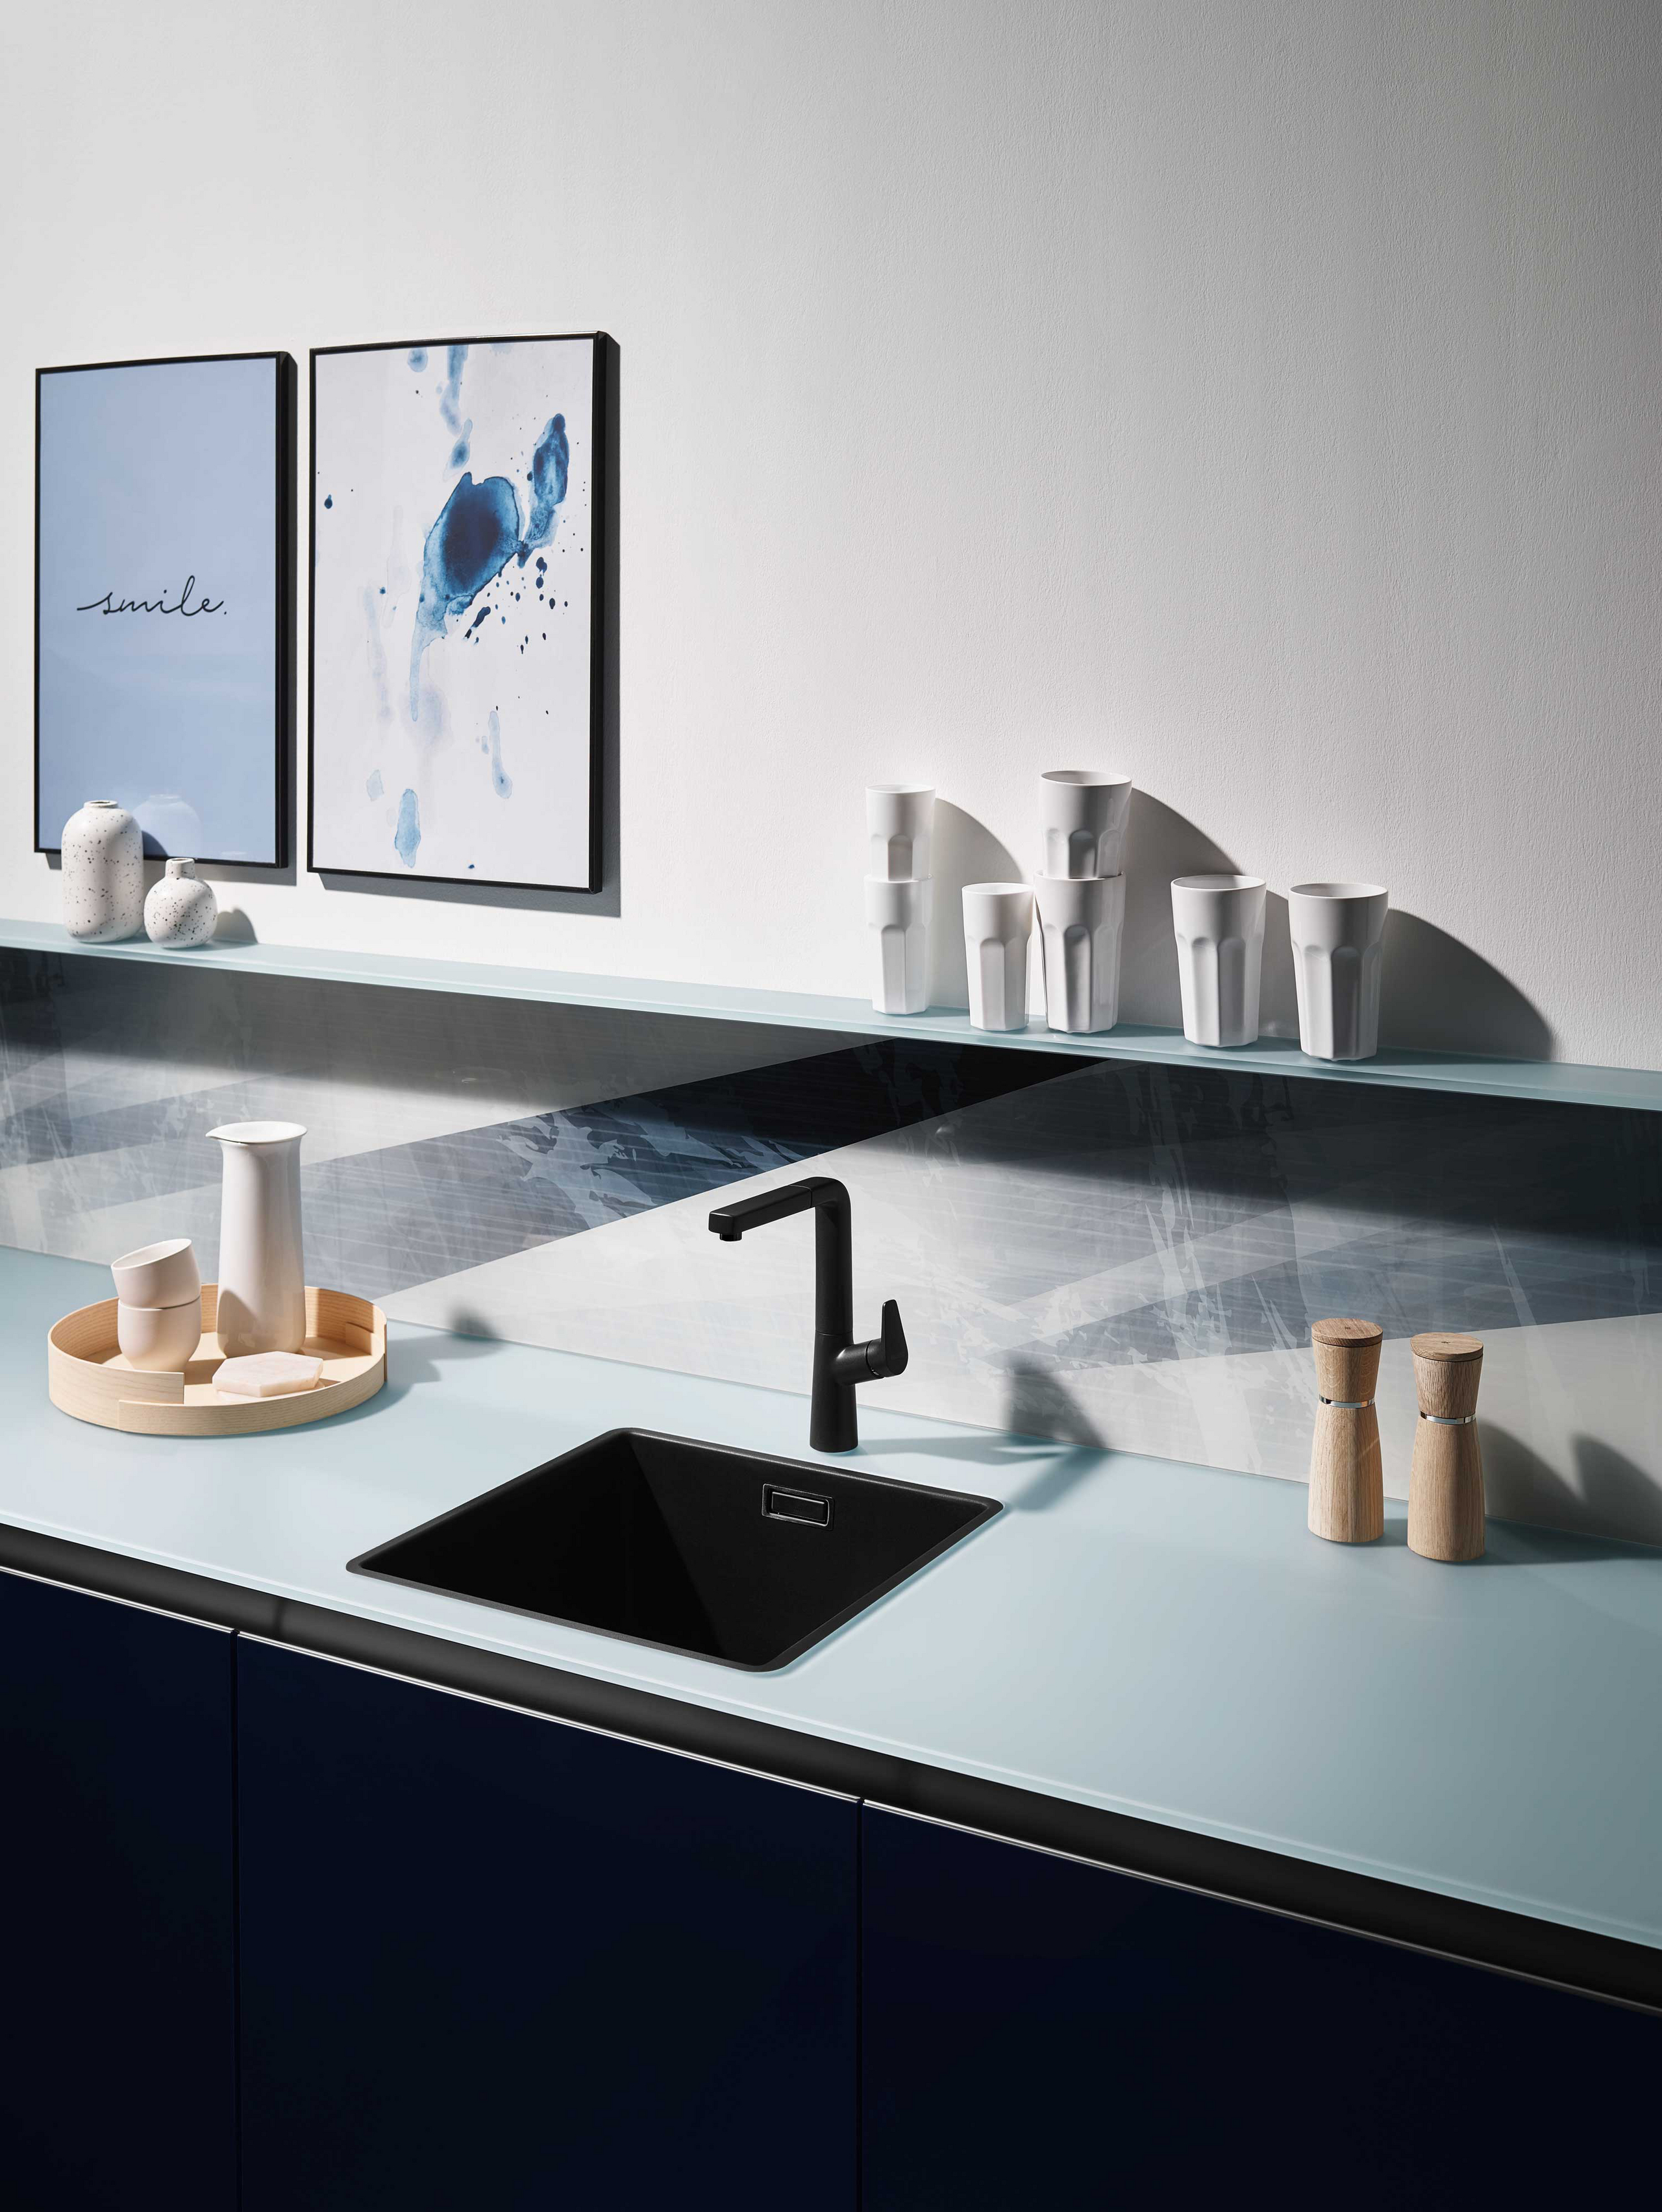 Whether it's a magnetic board, a simple niche backsplash or a glass worktop, a subtle shade of blue is versatile.